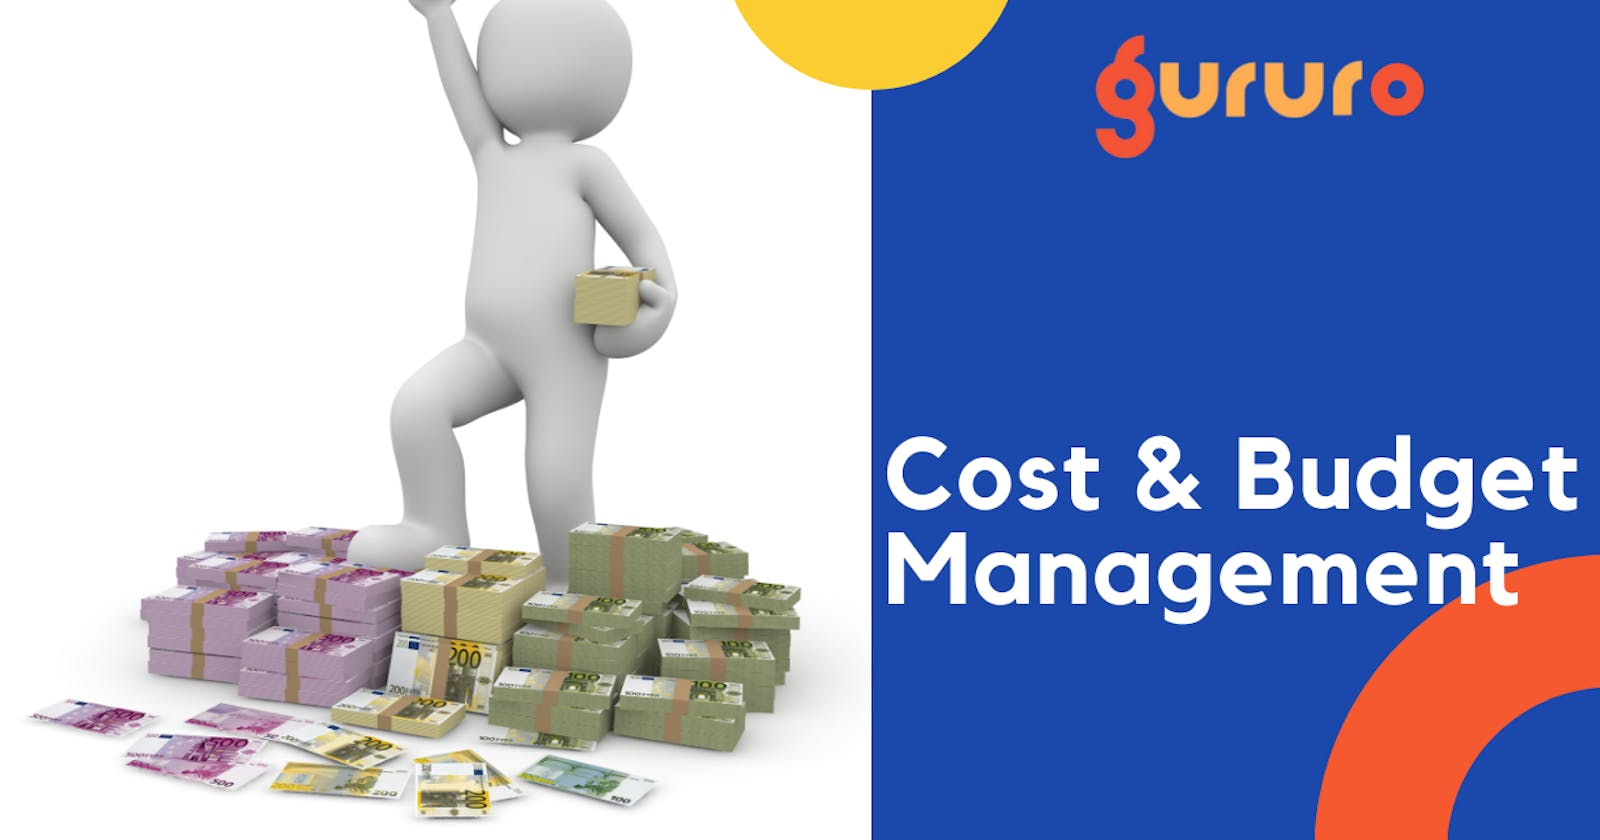 Cost and Budget Management - Gururo